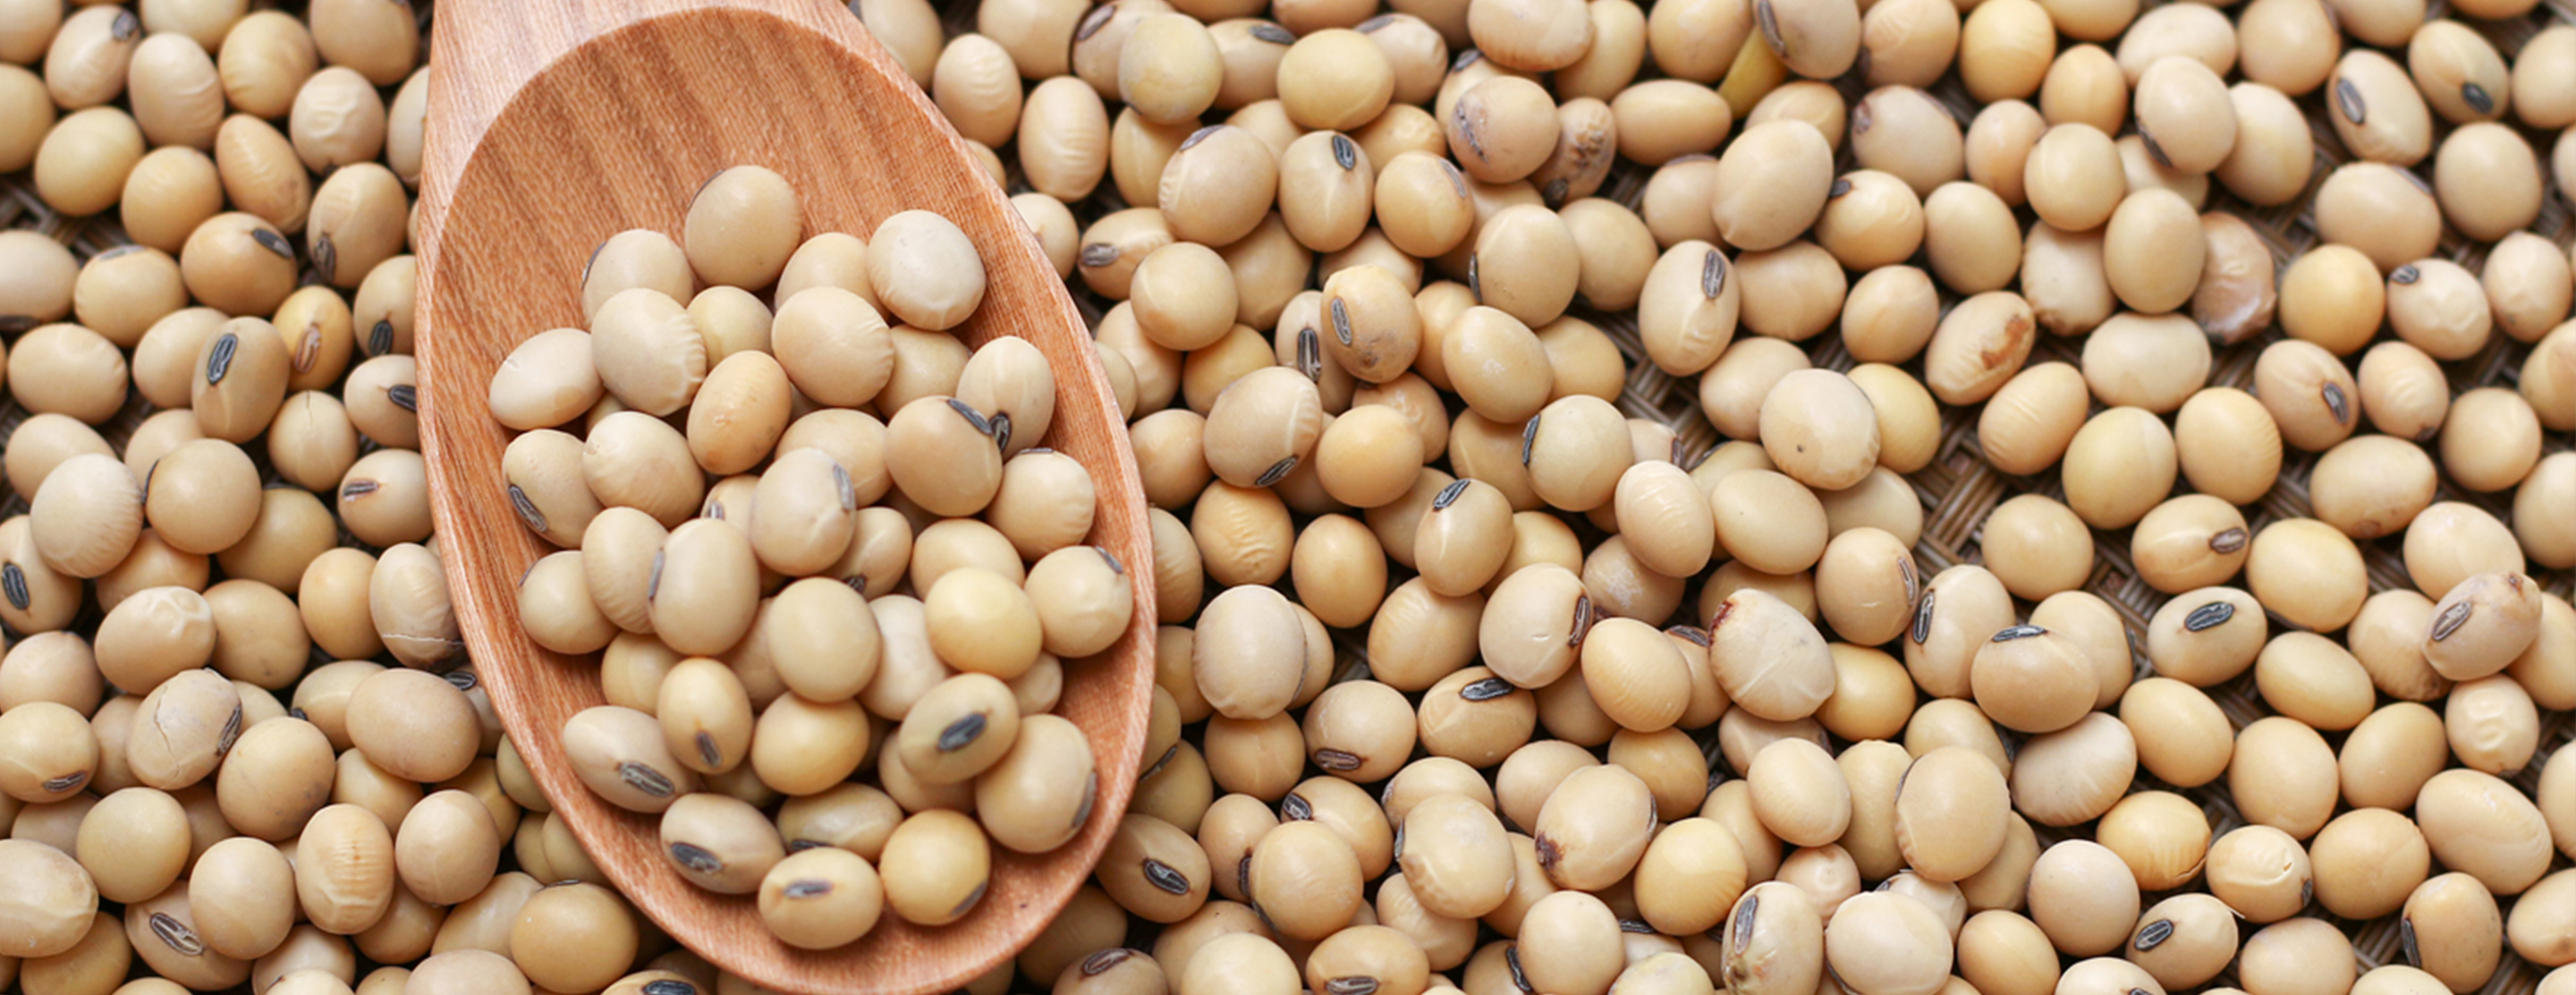 Top 20 Ways to Get More Soy in Your Diet, Patient Education